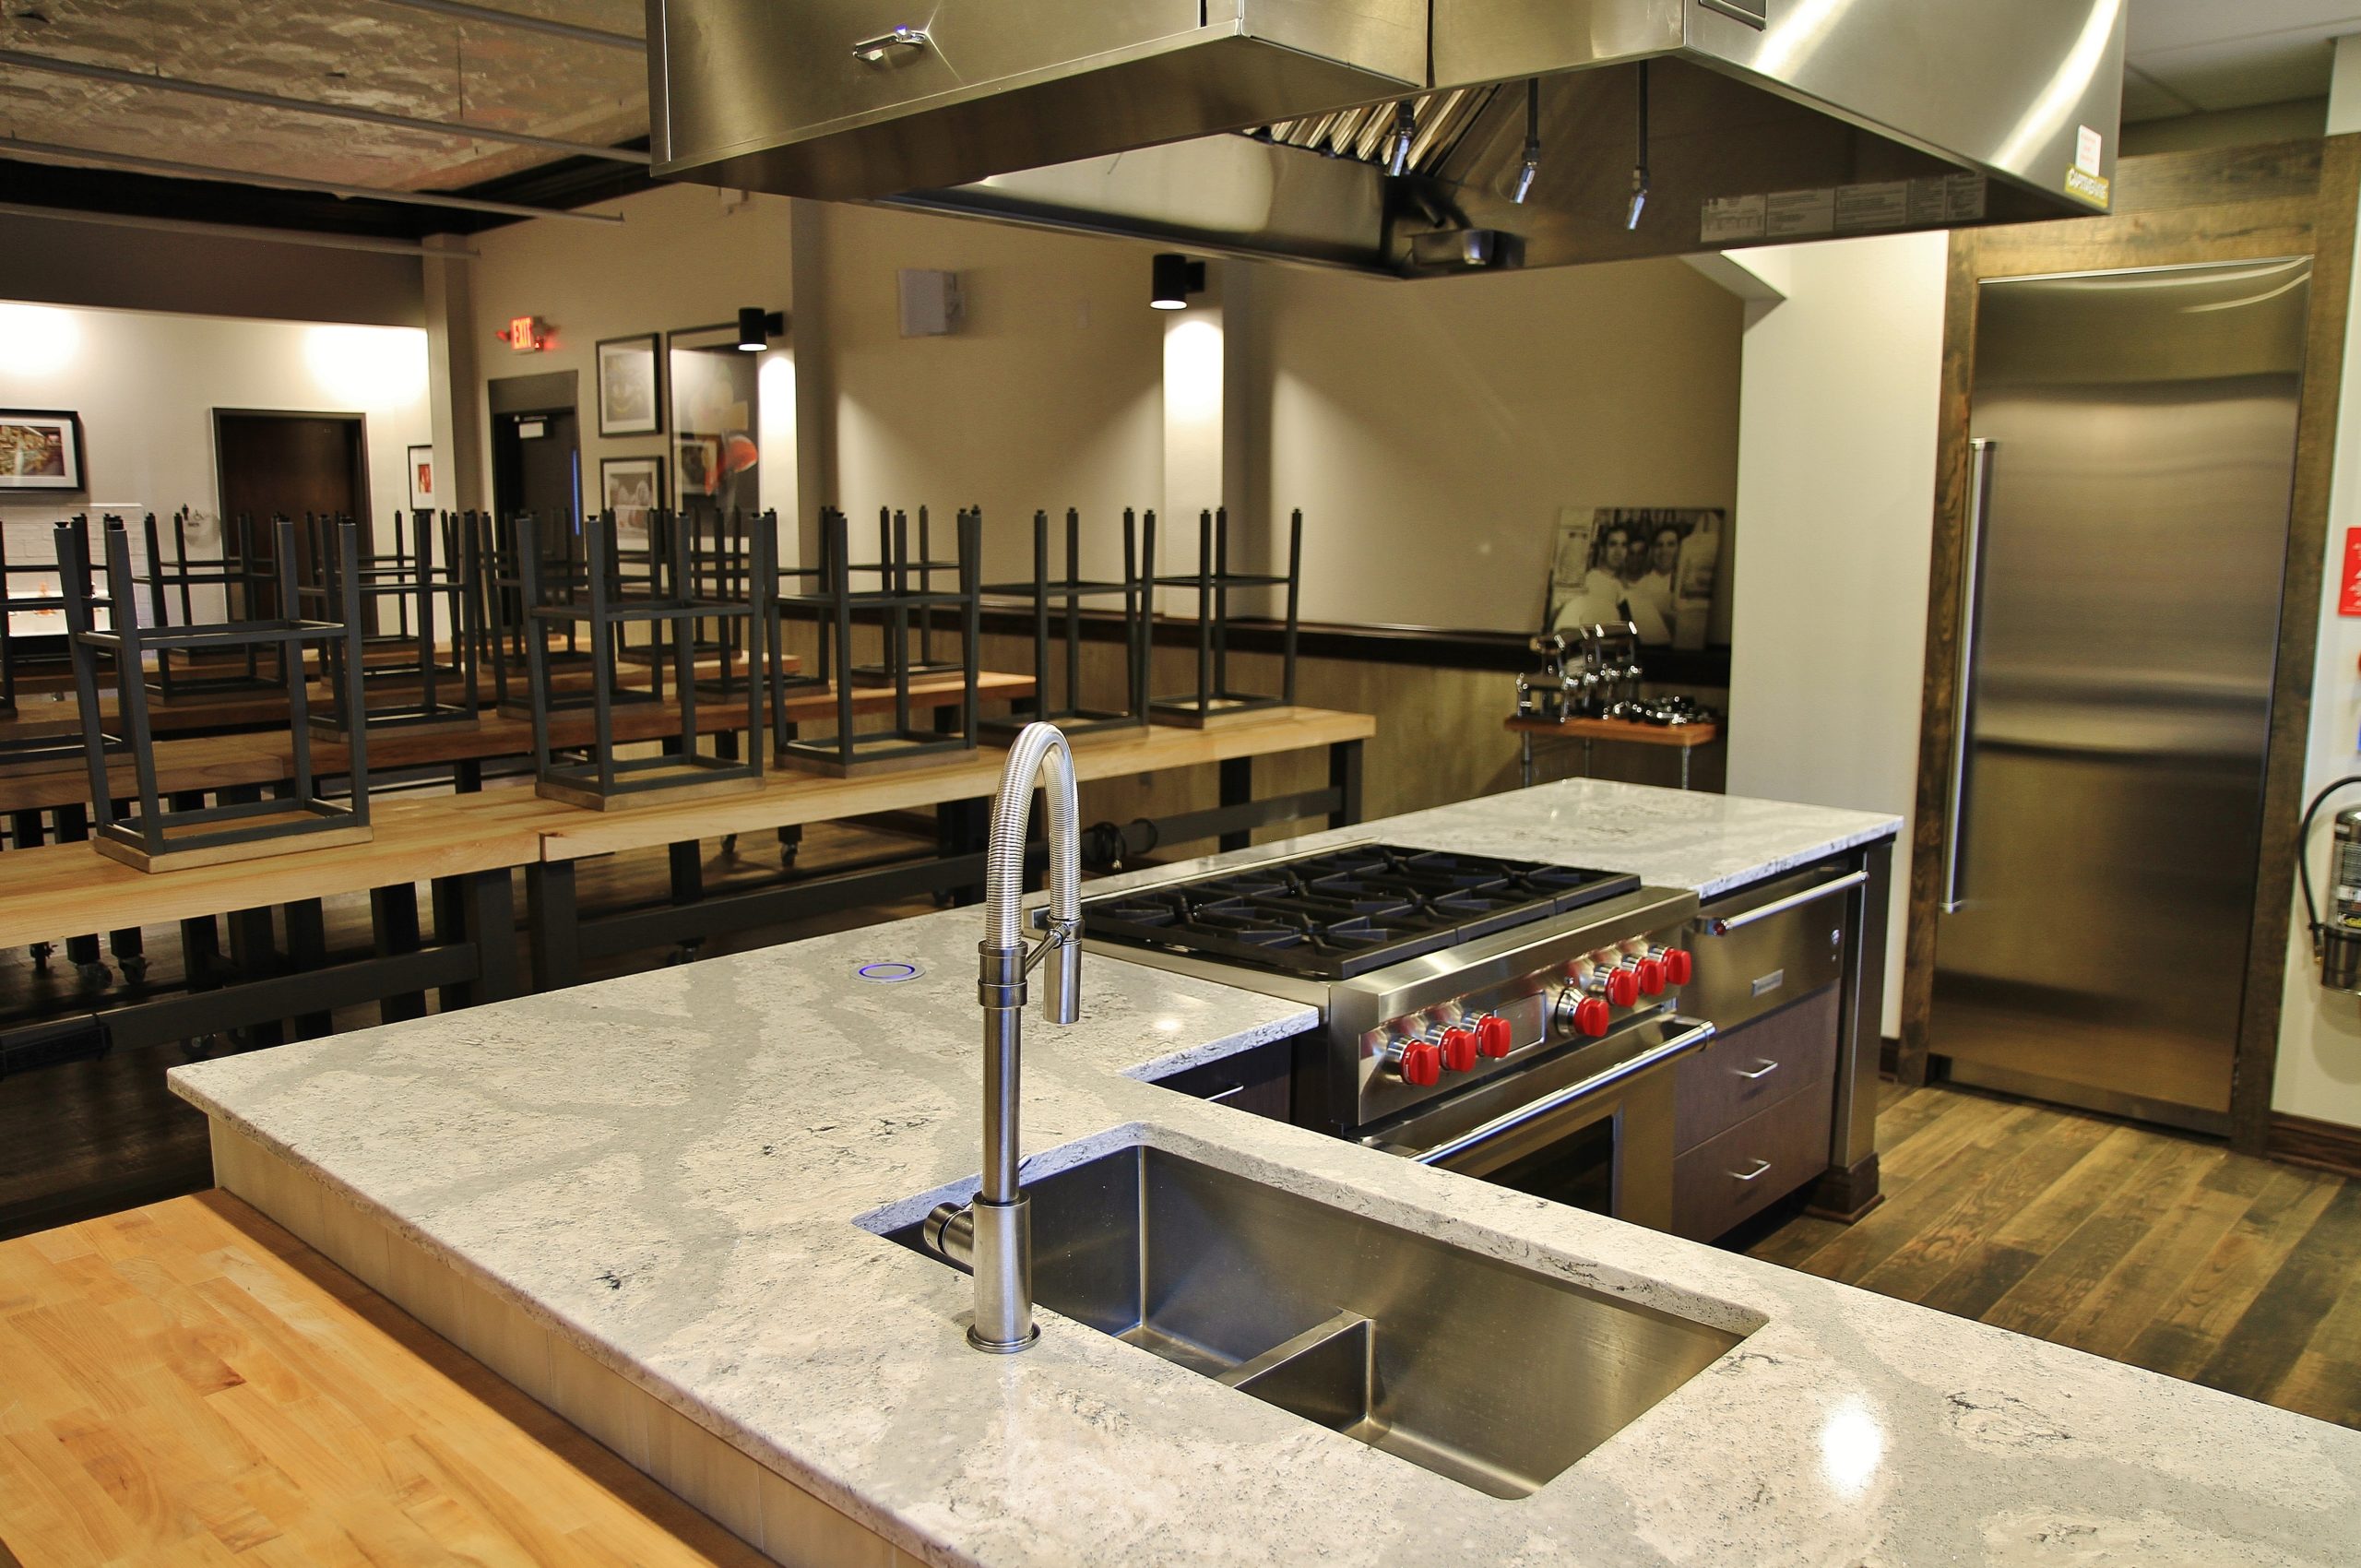 StoreMasters planned the catering space to support the store as well as meet the catering needs of special events